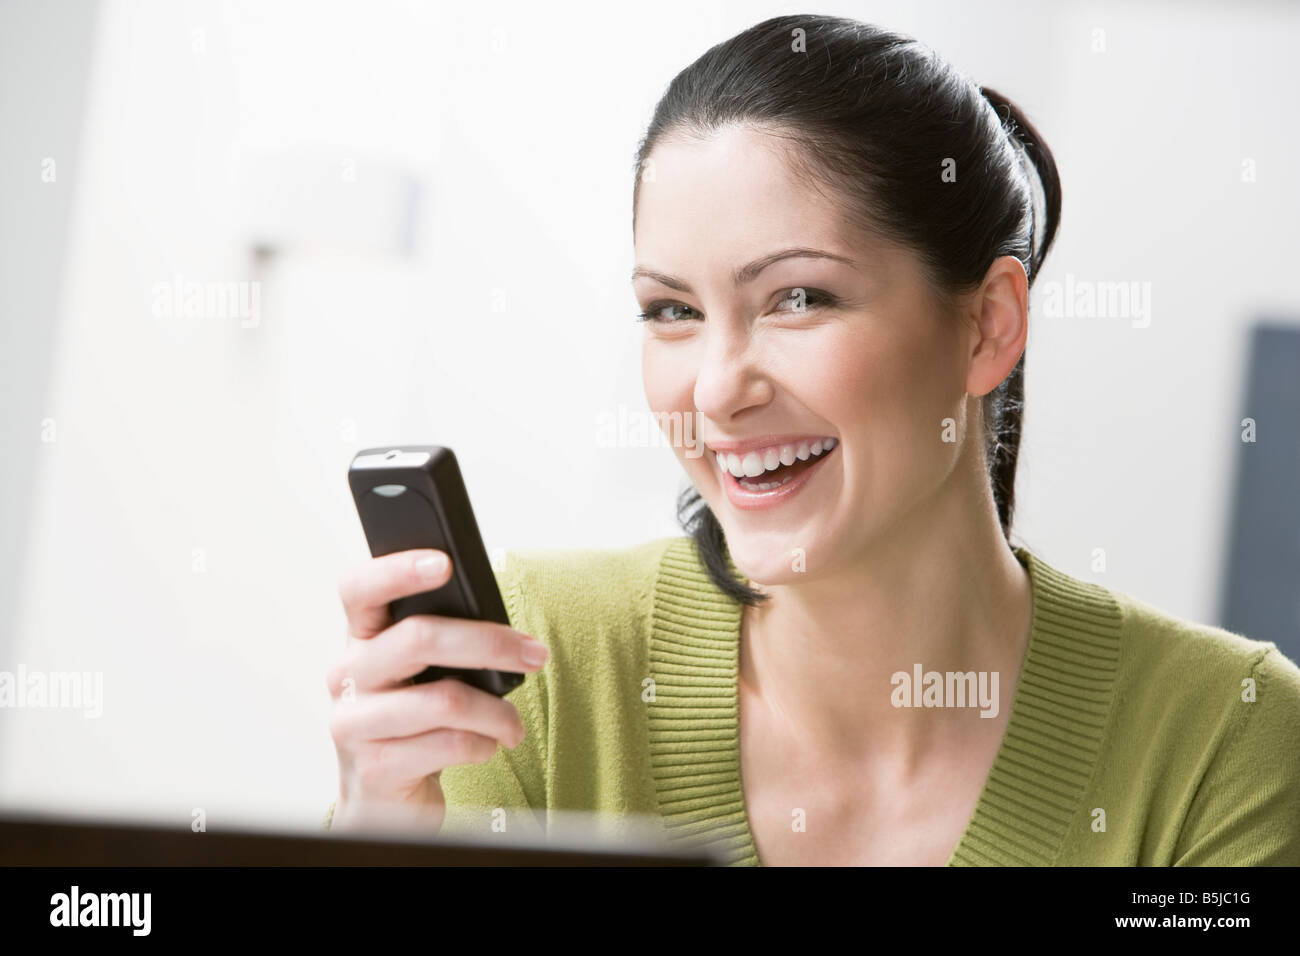 Portrait of young woman with mobile phone Banque D'Images